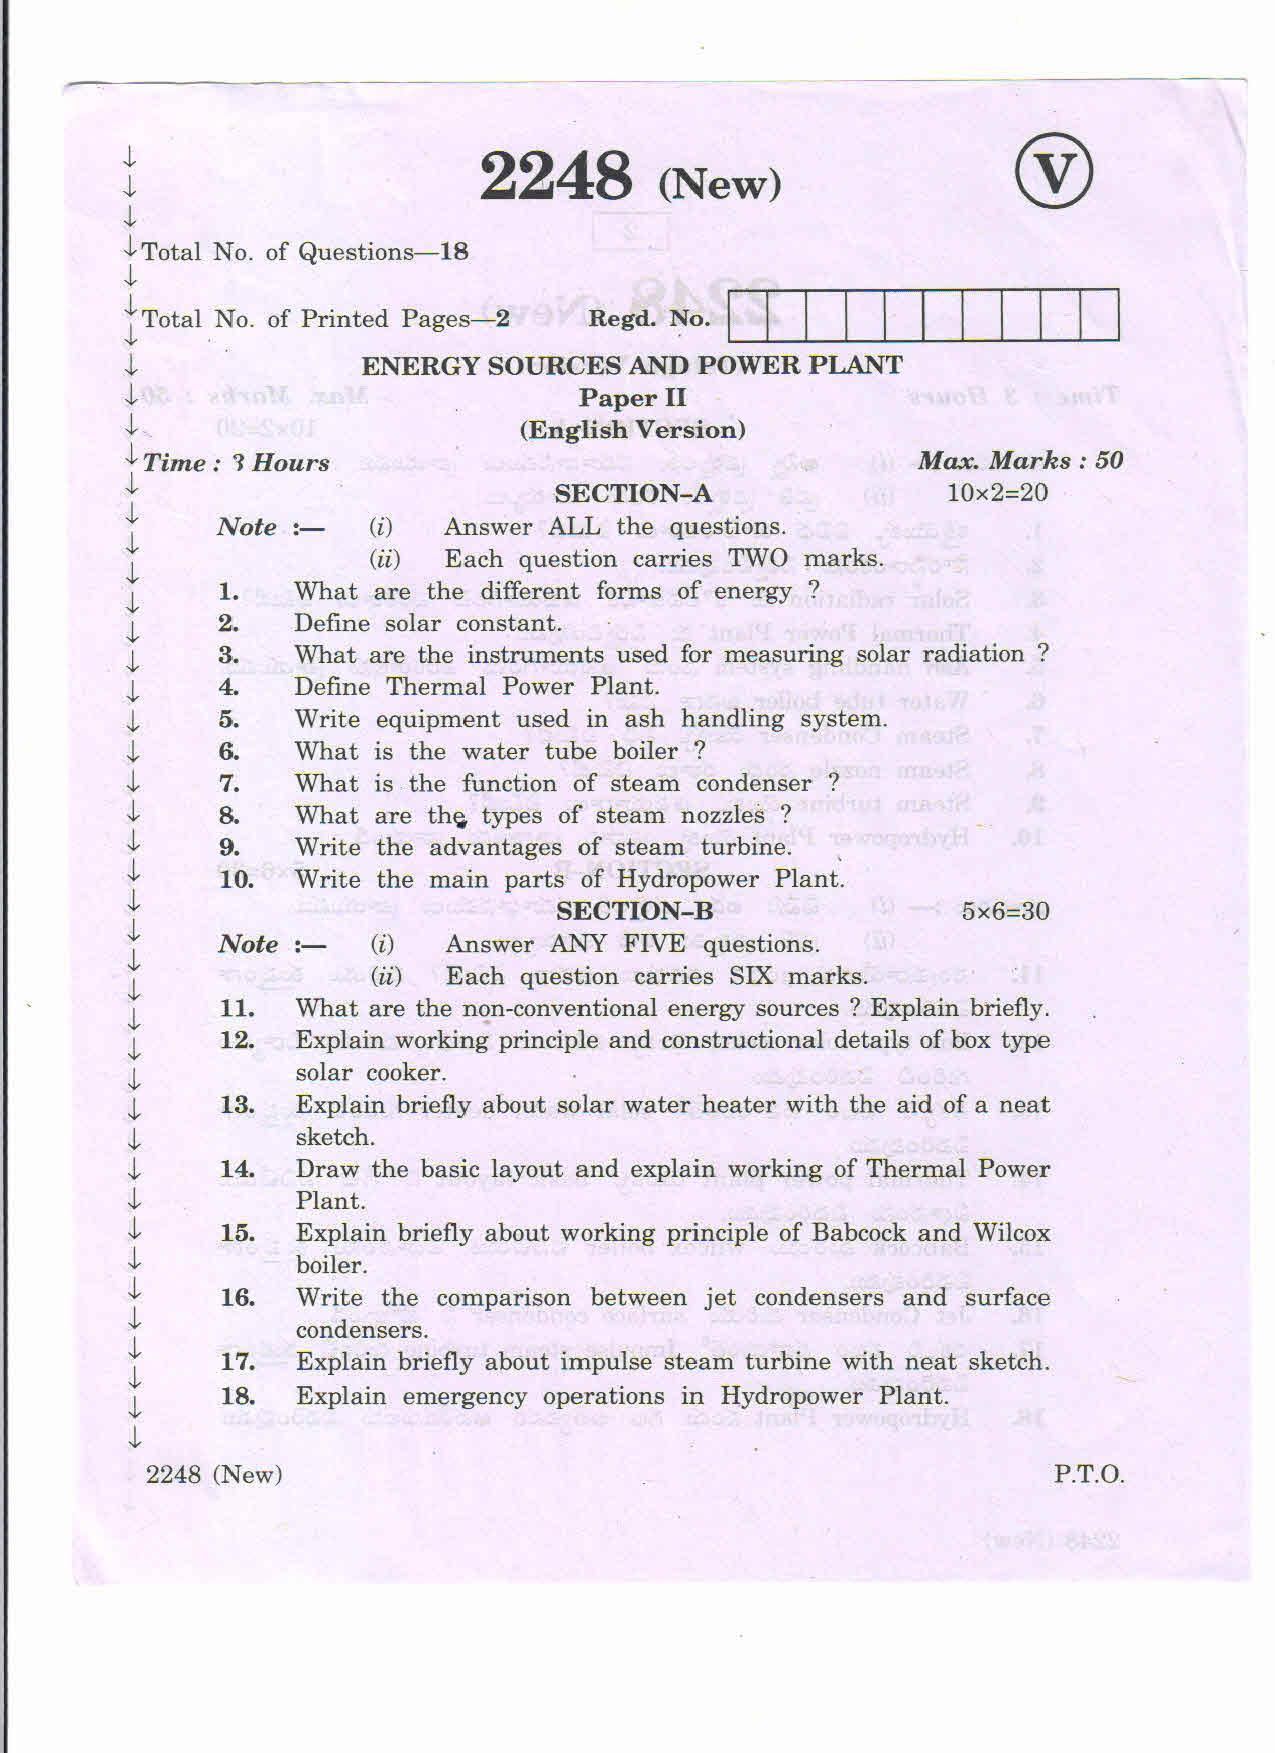 AP Inter 2nd Year Vocational Question Paper March - 2020 - Energy Sources Power Plant - II (new) - Page 1